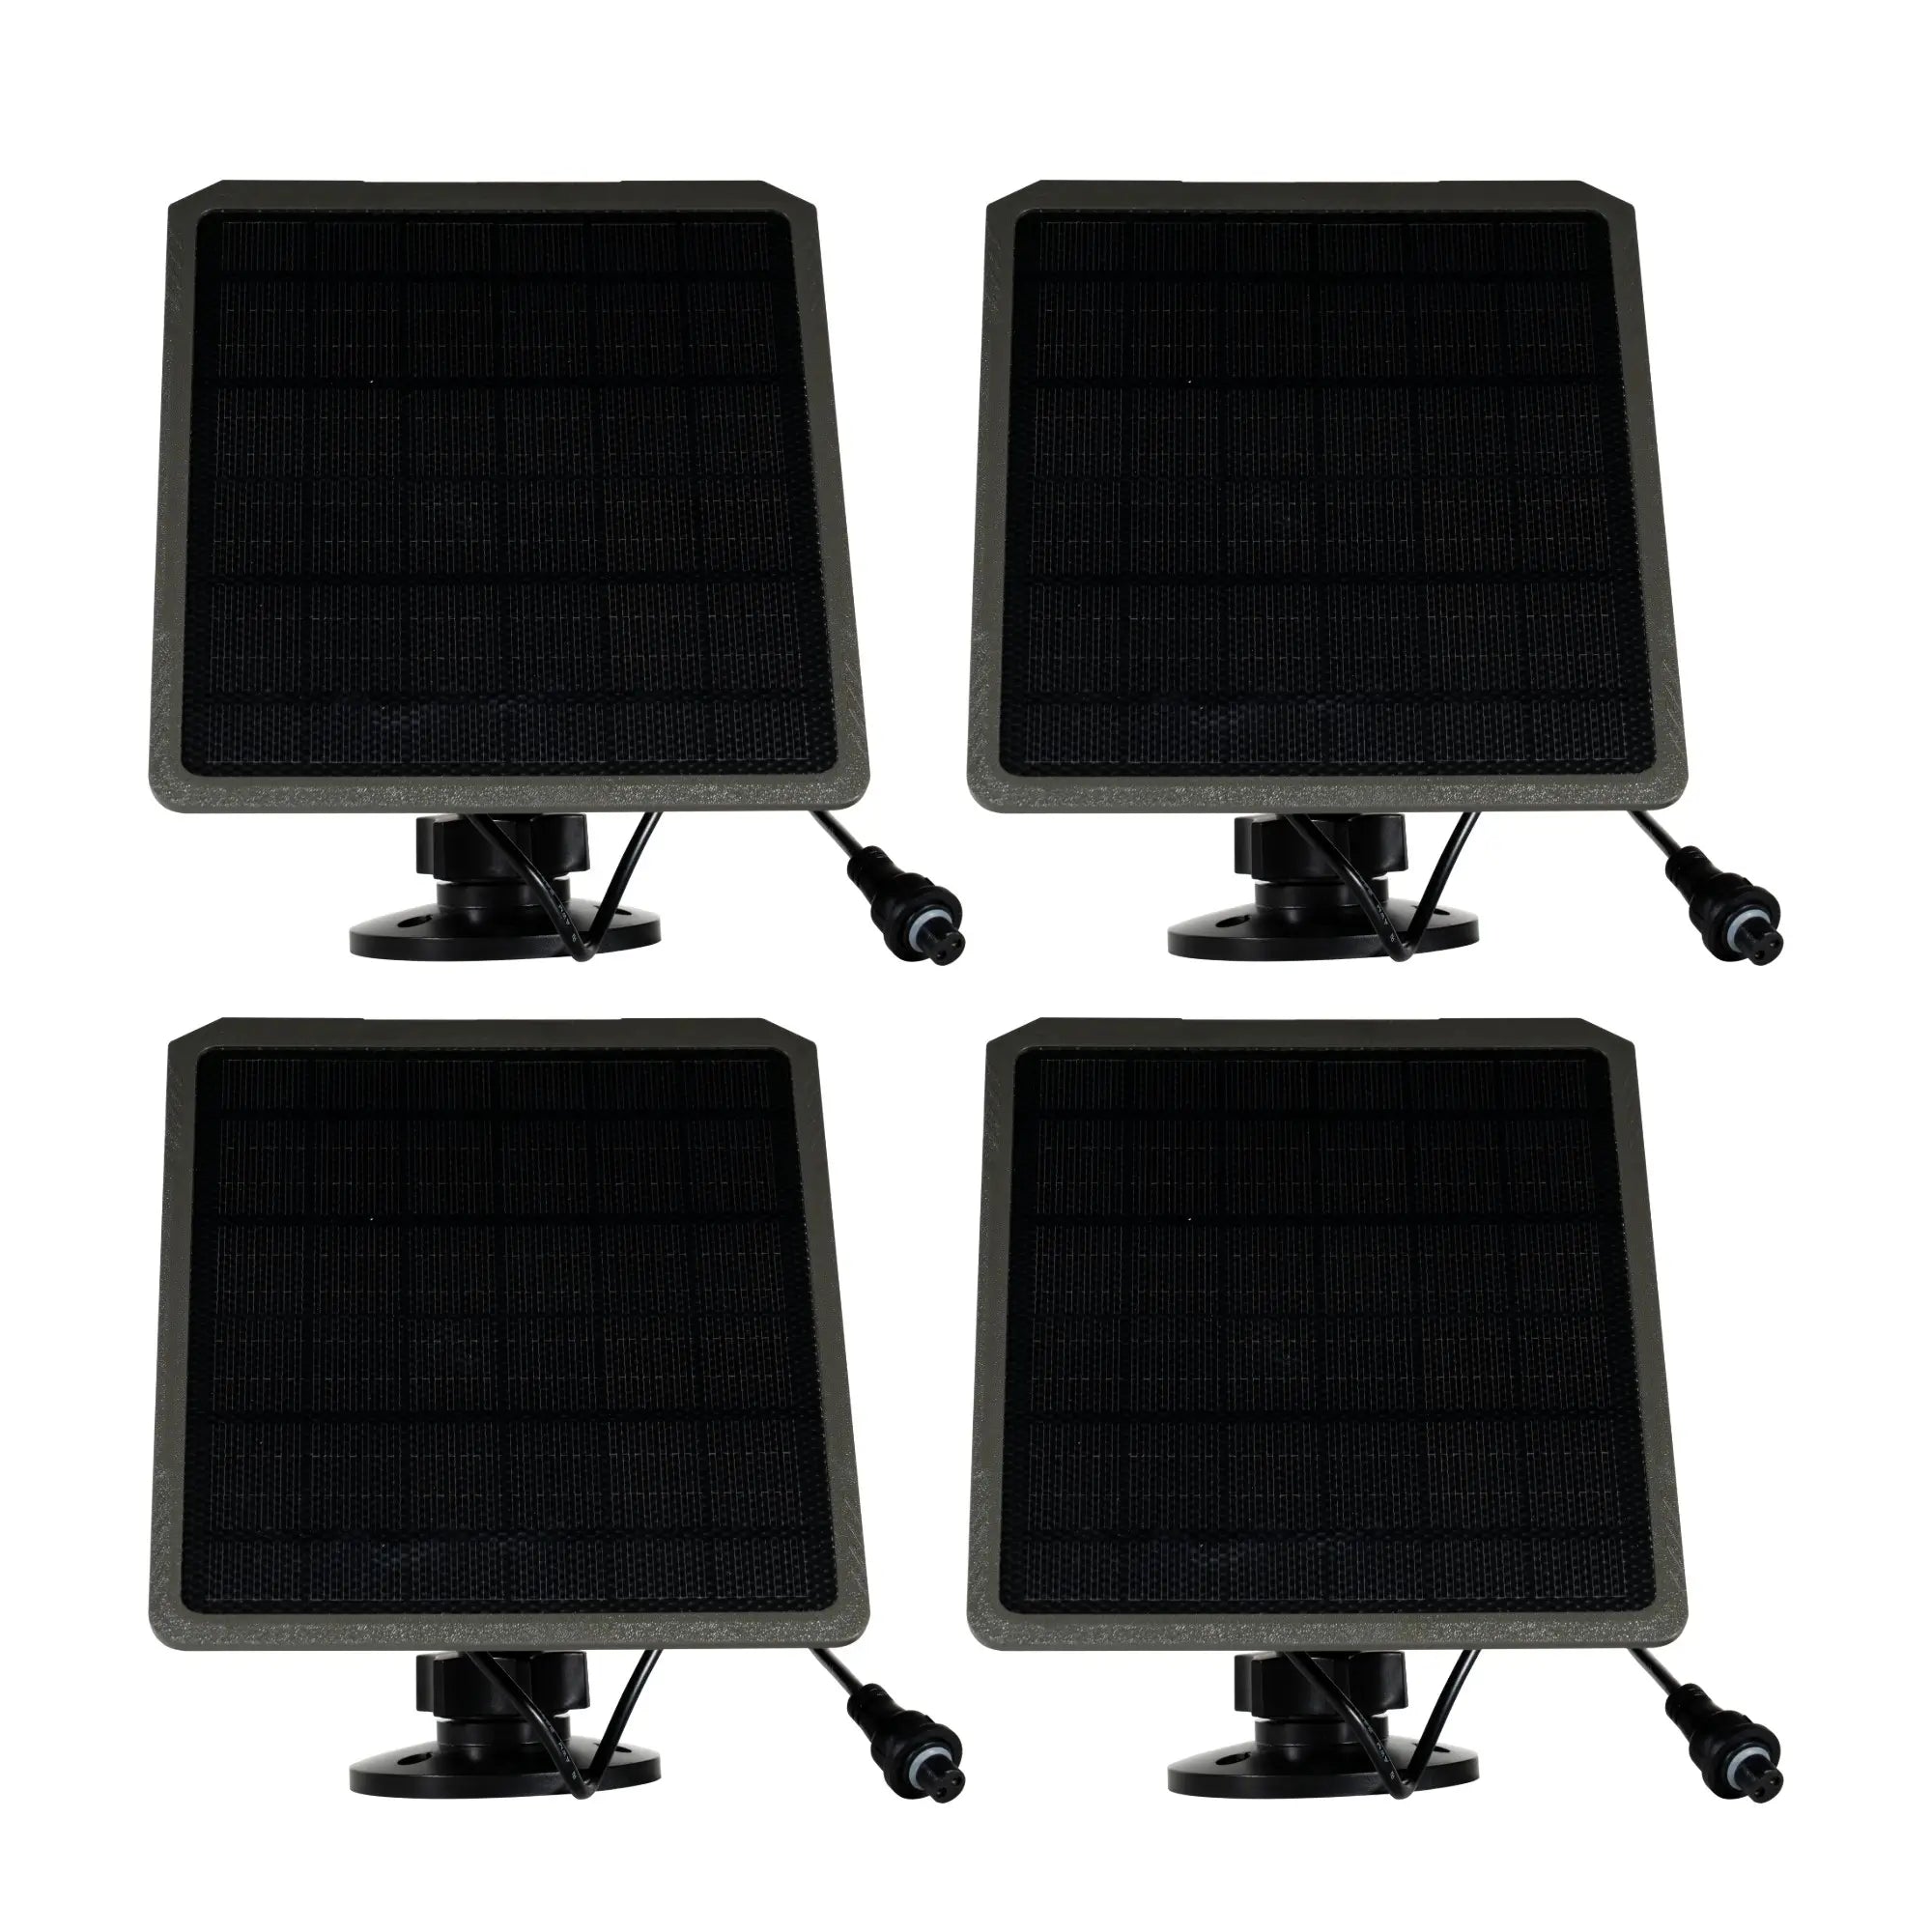 GardePro SP350 Solar Panel with Rechargeable Battery, 12V/1A, 9V/1.3A, 6V/2A, Plug 5.5x2.1mm/4.0x1.7mm for GardePro Trail Cameras E5, E5S, E6, E7, E8, E9, X50, X50MB, A3, A3S, A5, A5WF